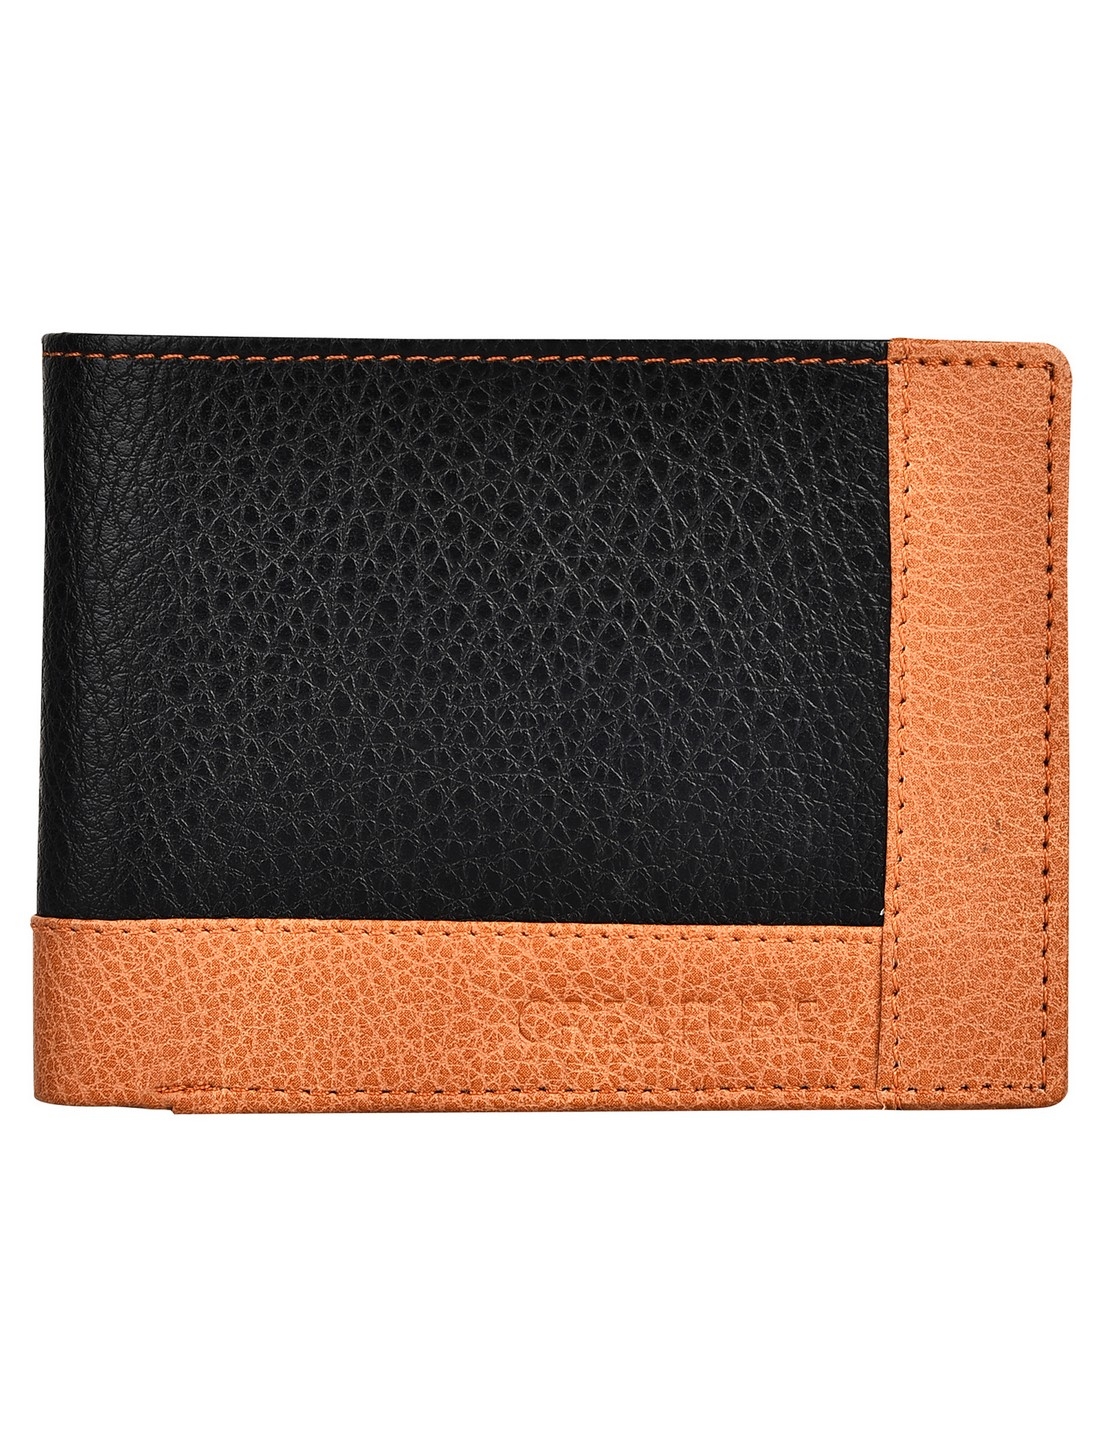 CREATURE | CREATURE Dual Tone Wallet with Coin Pocket for Men